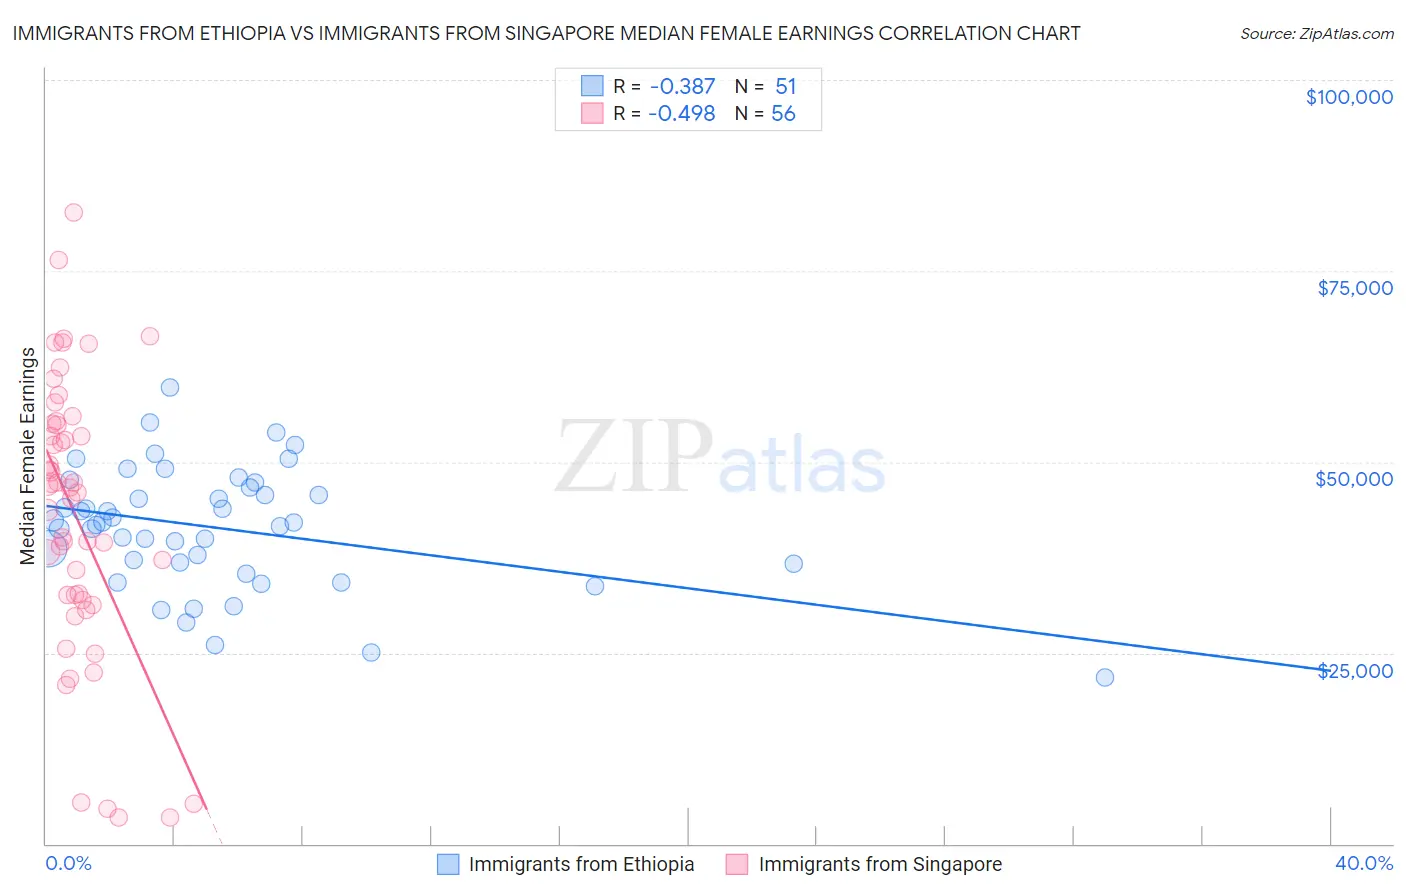 Immigrants from Ethiopia vs Immigrants from Singapore Median Female Earnings